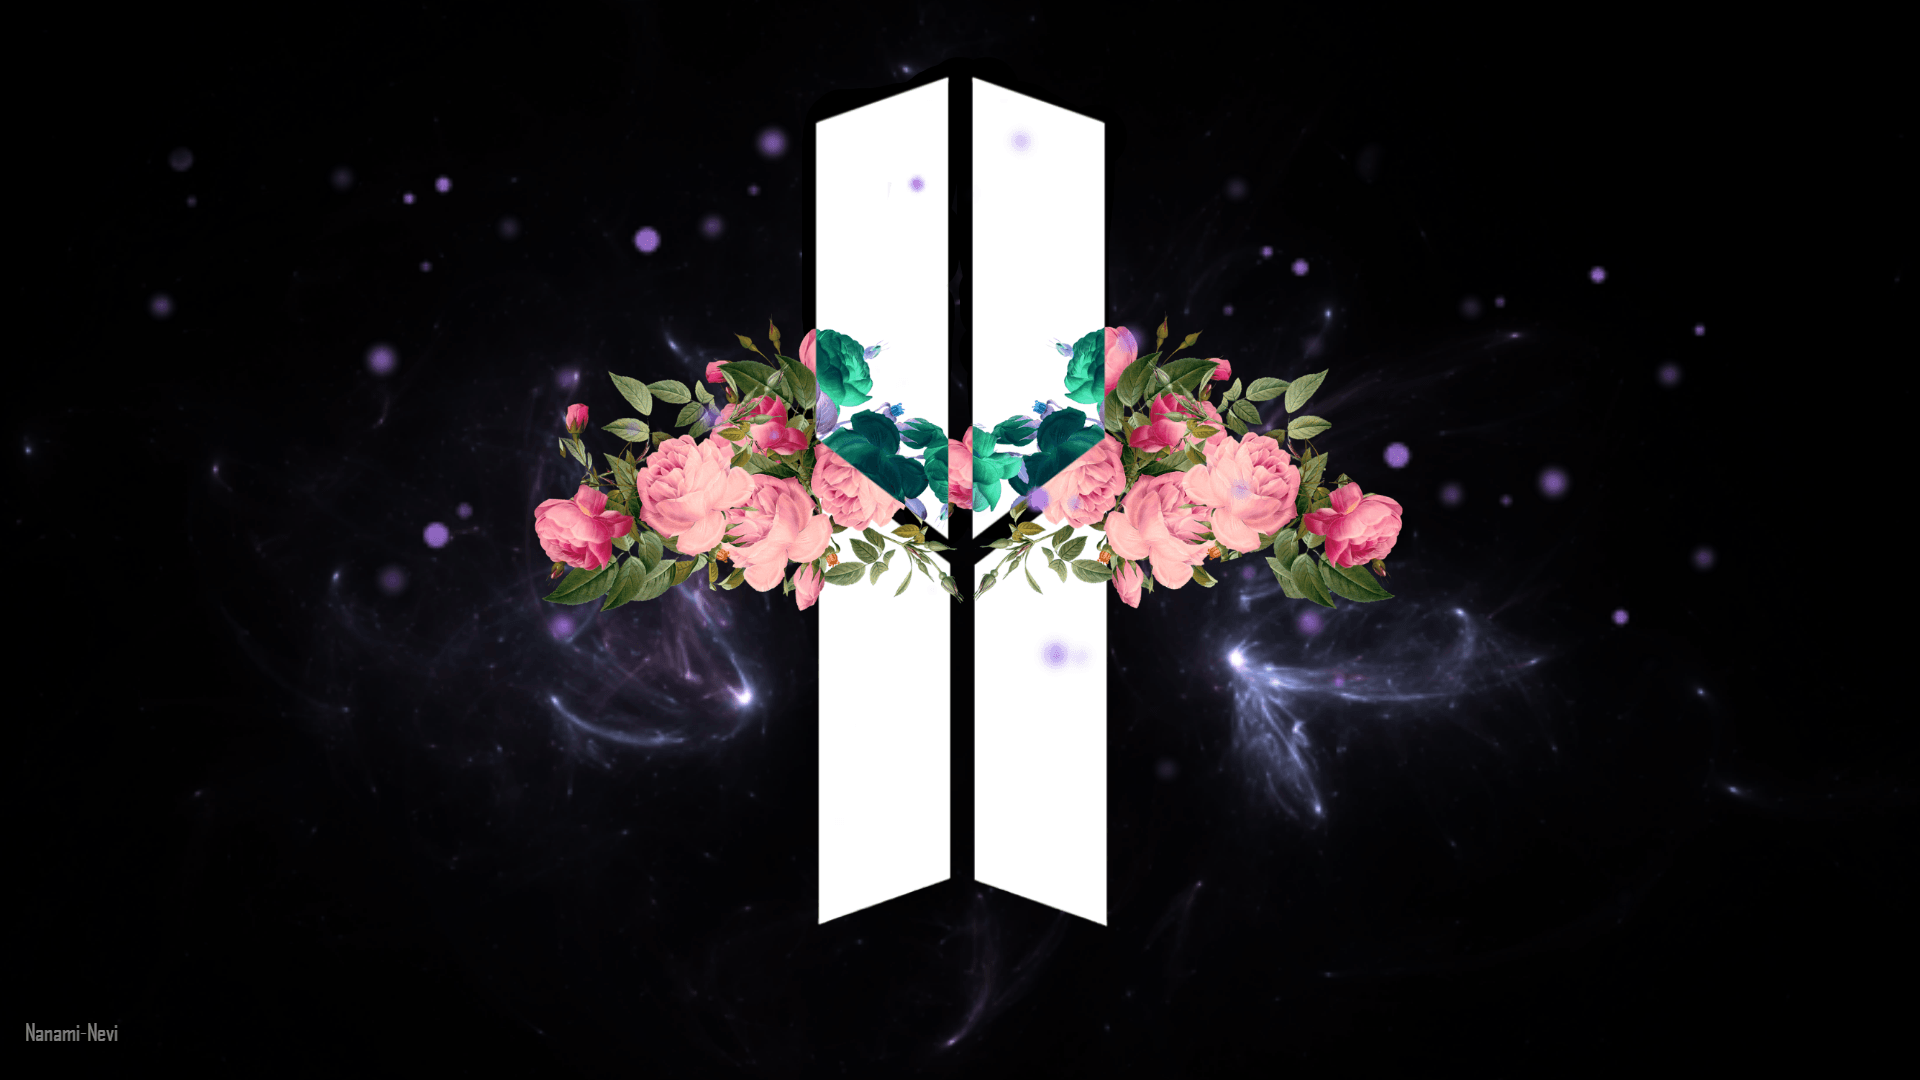 My Creation For New BTS Logo PC 1920x1080 Wallpaper Wp6407973